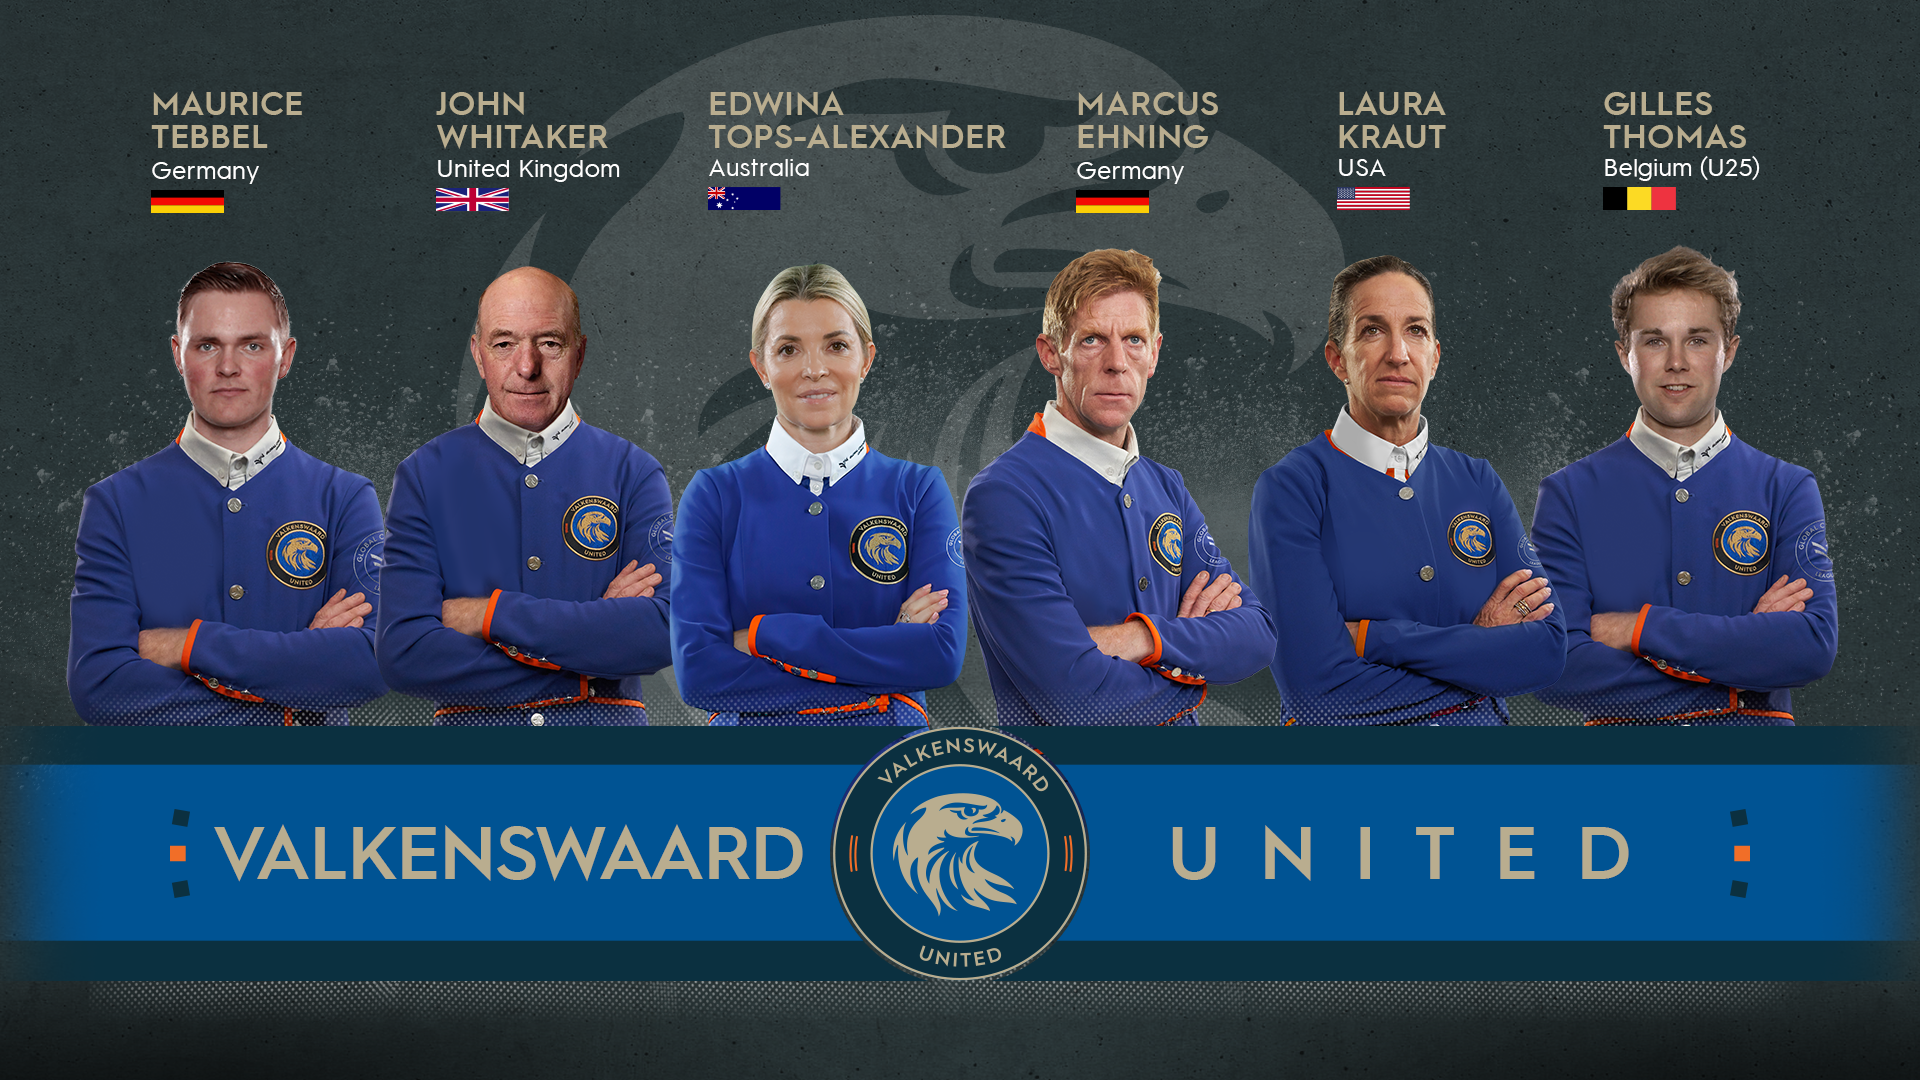 The Valkenswaard United team lineup for the 2022 season